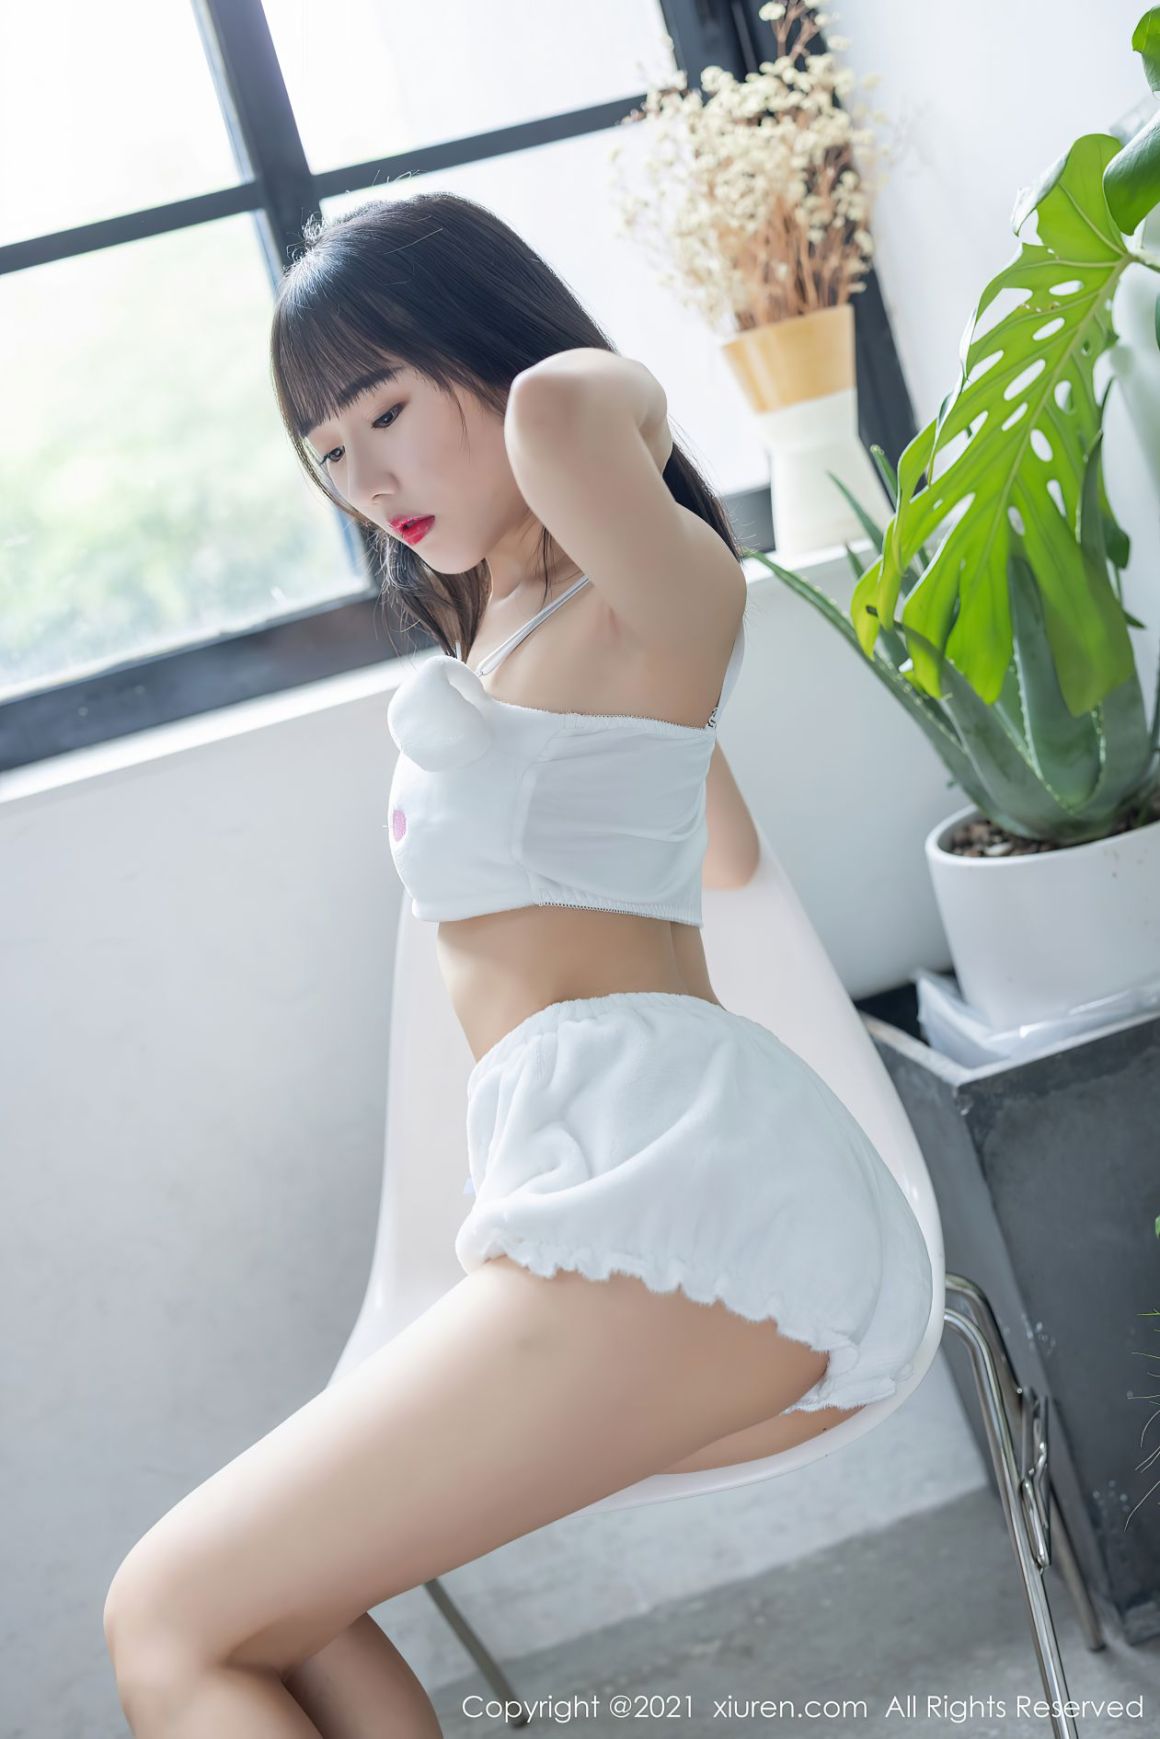 AsianOnlyfans.com 04 173 20211006